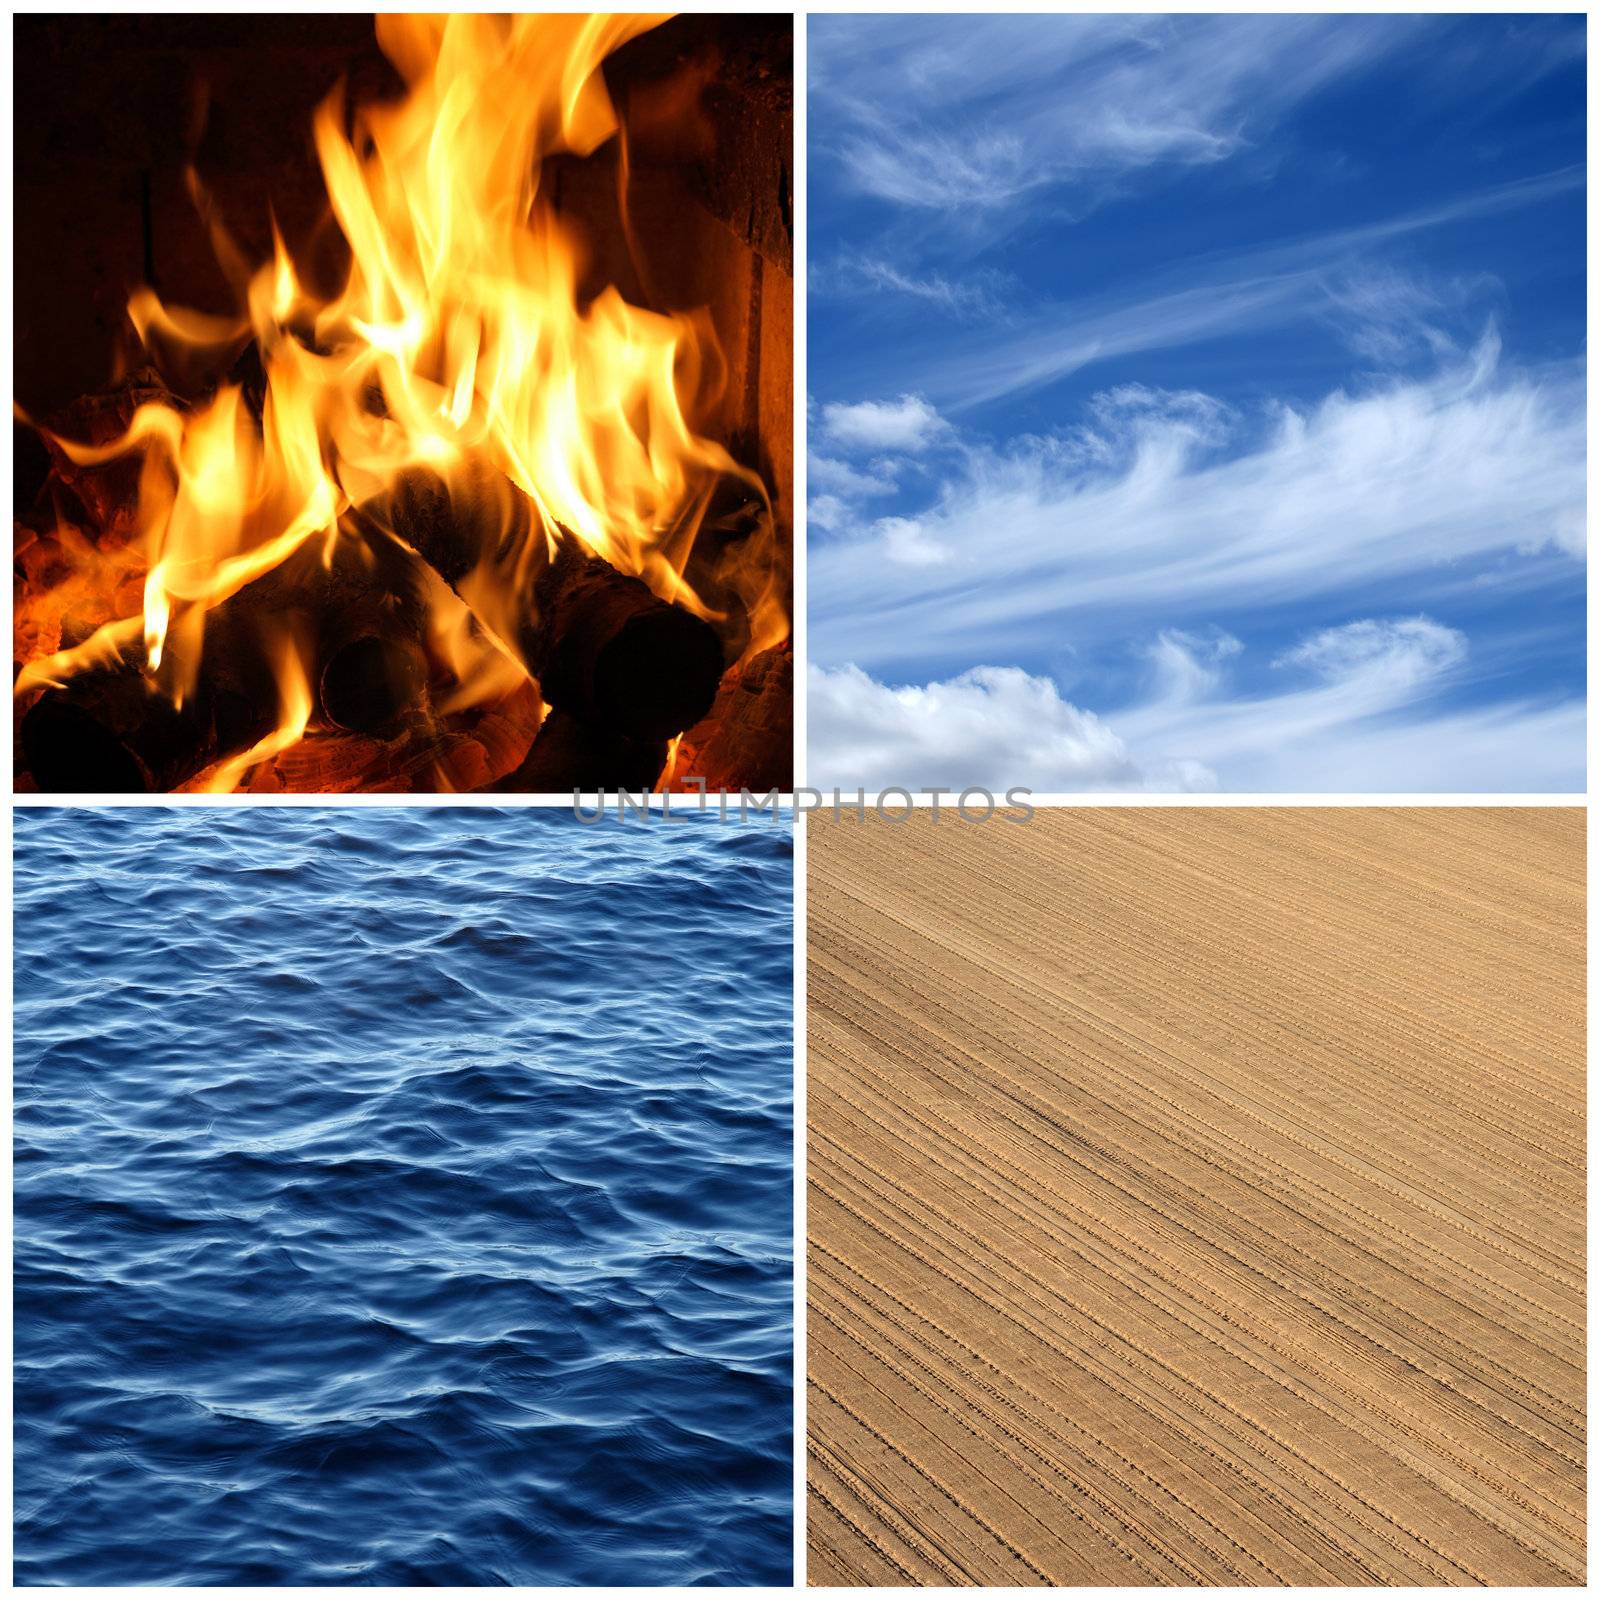 Four elements of nature. Fire, water, air and earth.